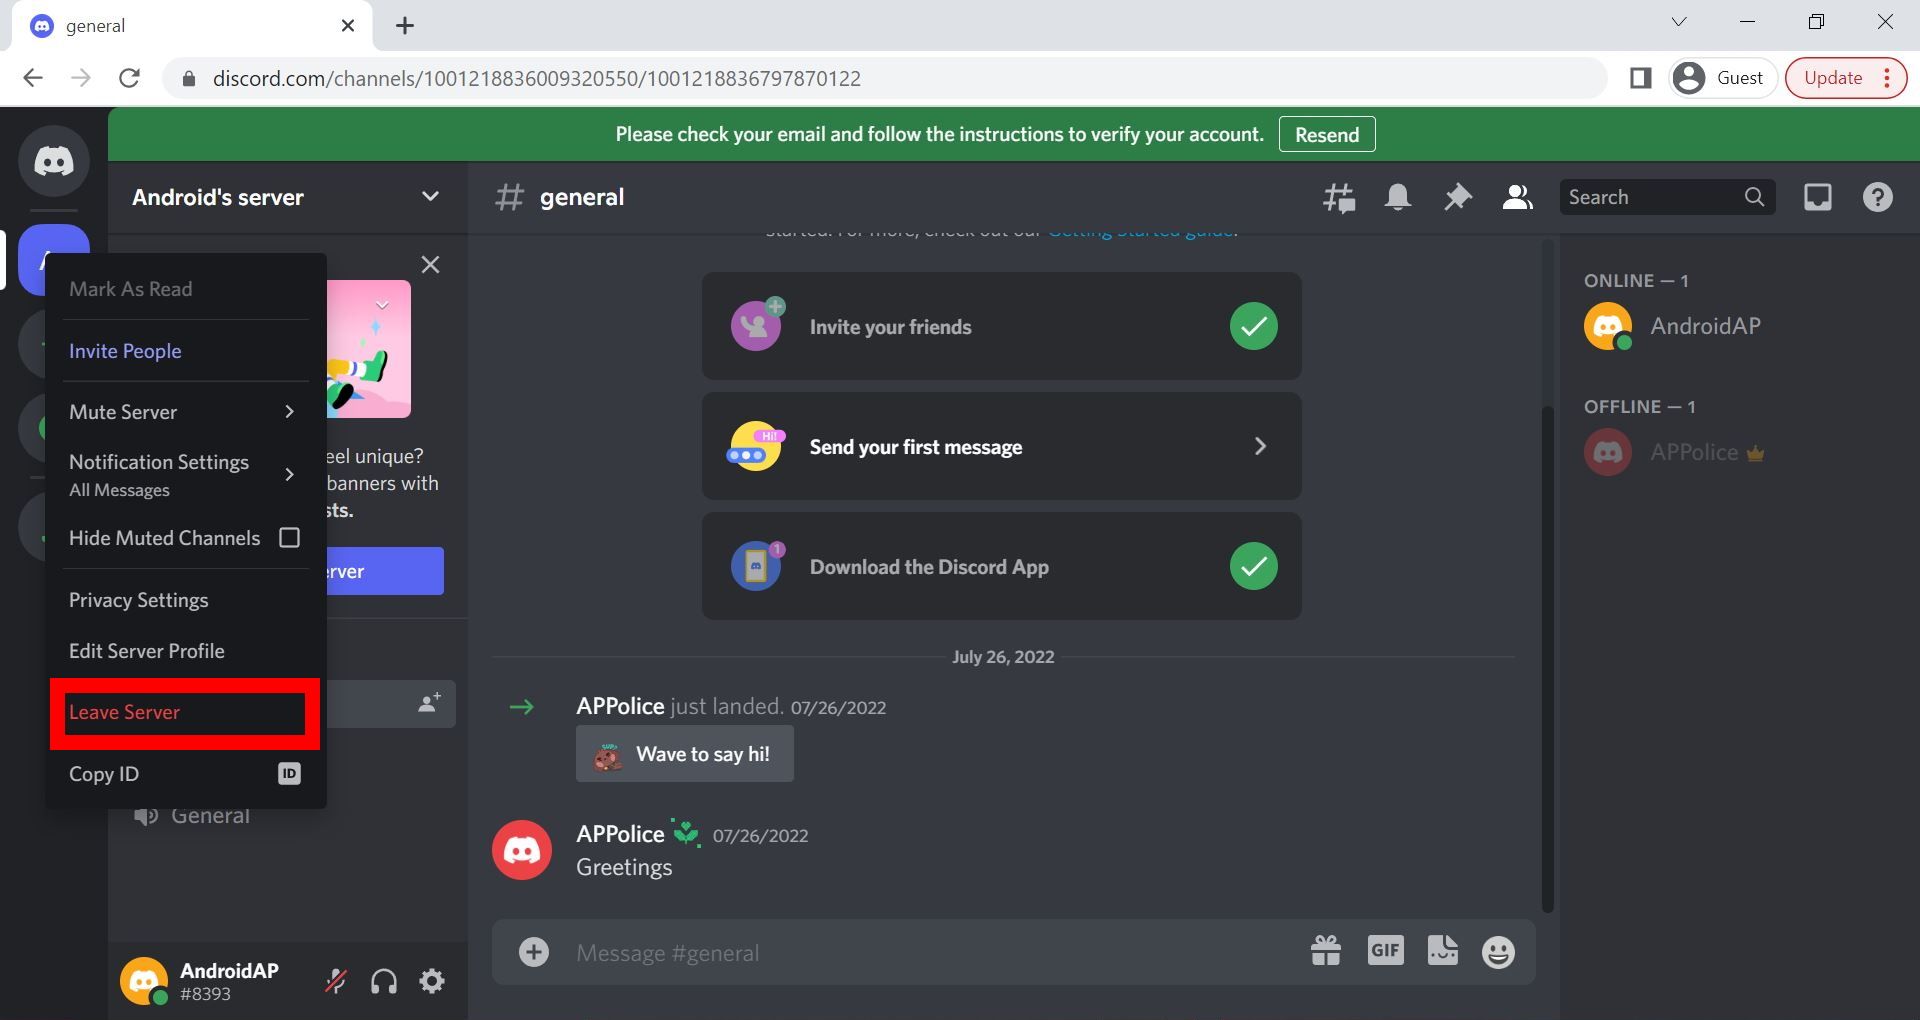 Screenshot of the Leave Server option on the Discord web page